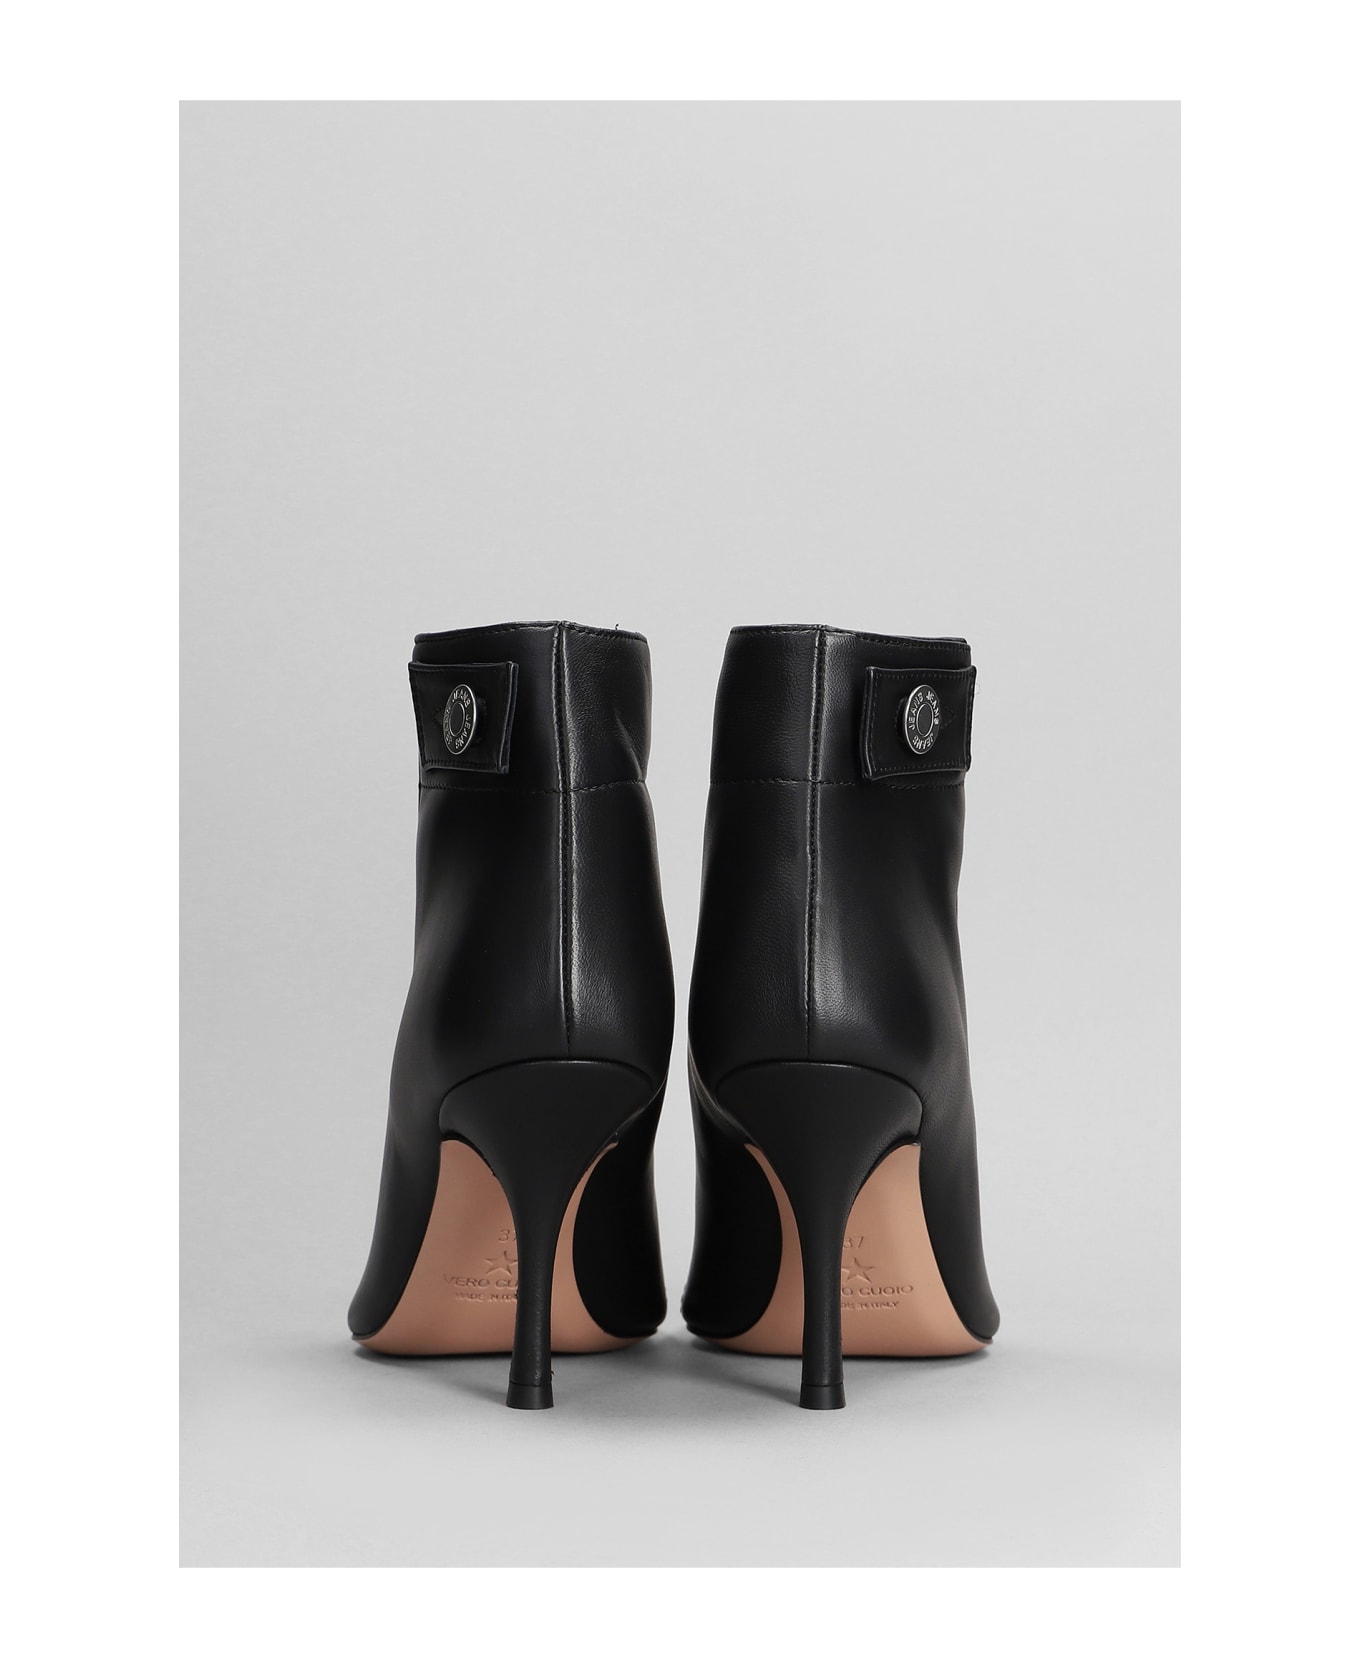 Marc Ellis High Heels Ankle Boots In Black Leather - black ブーツ